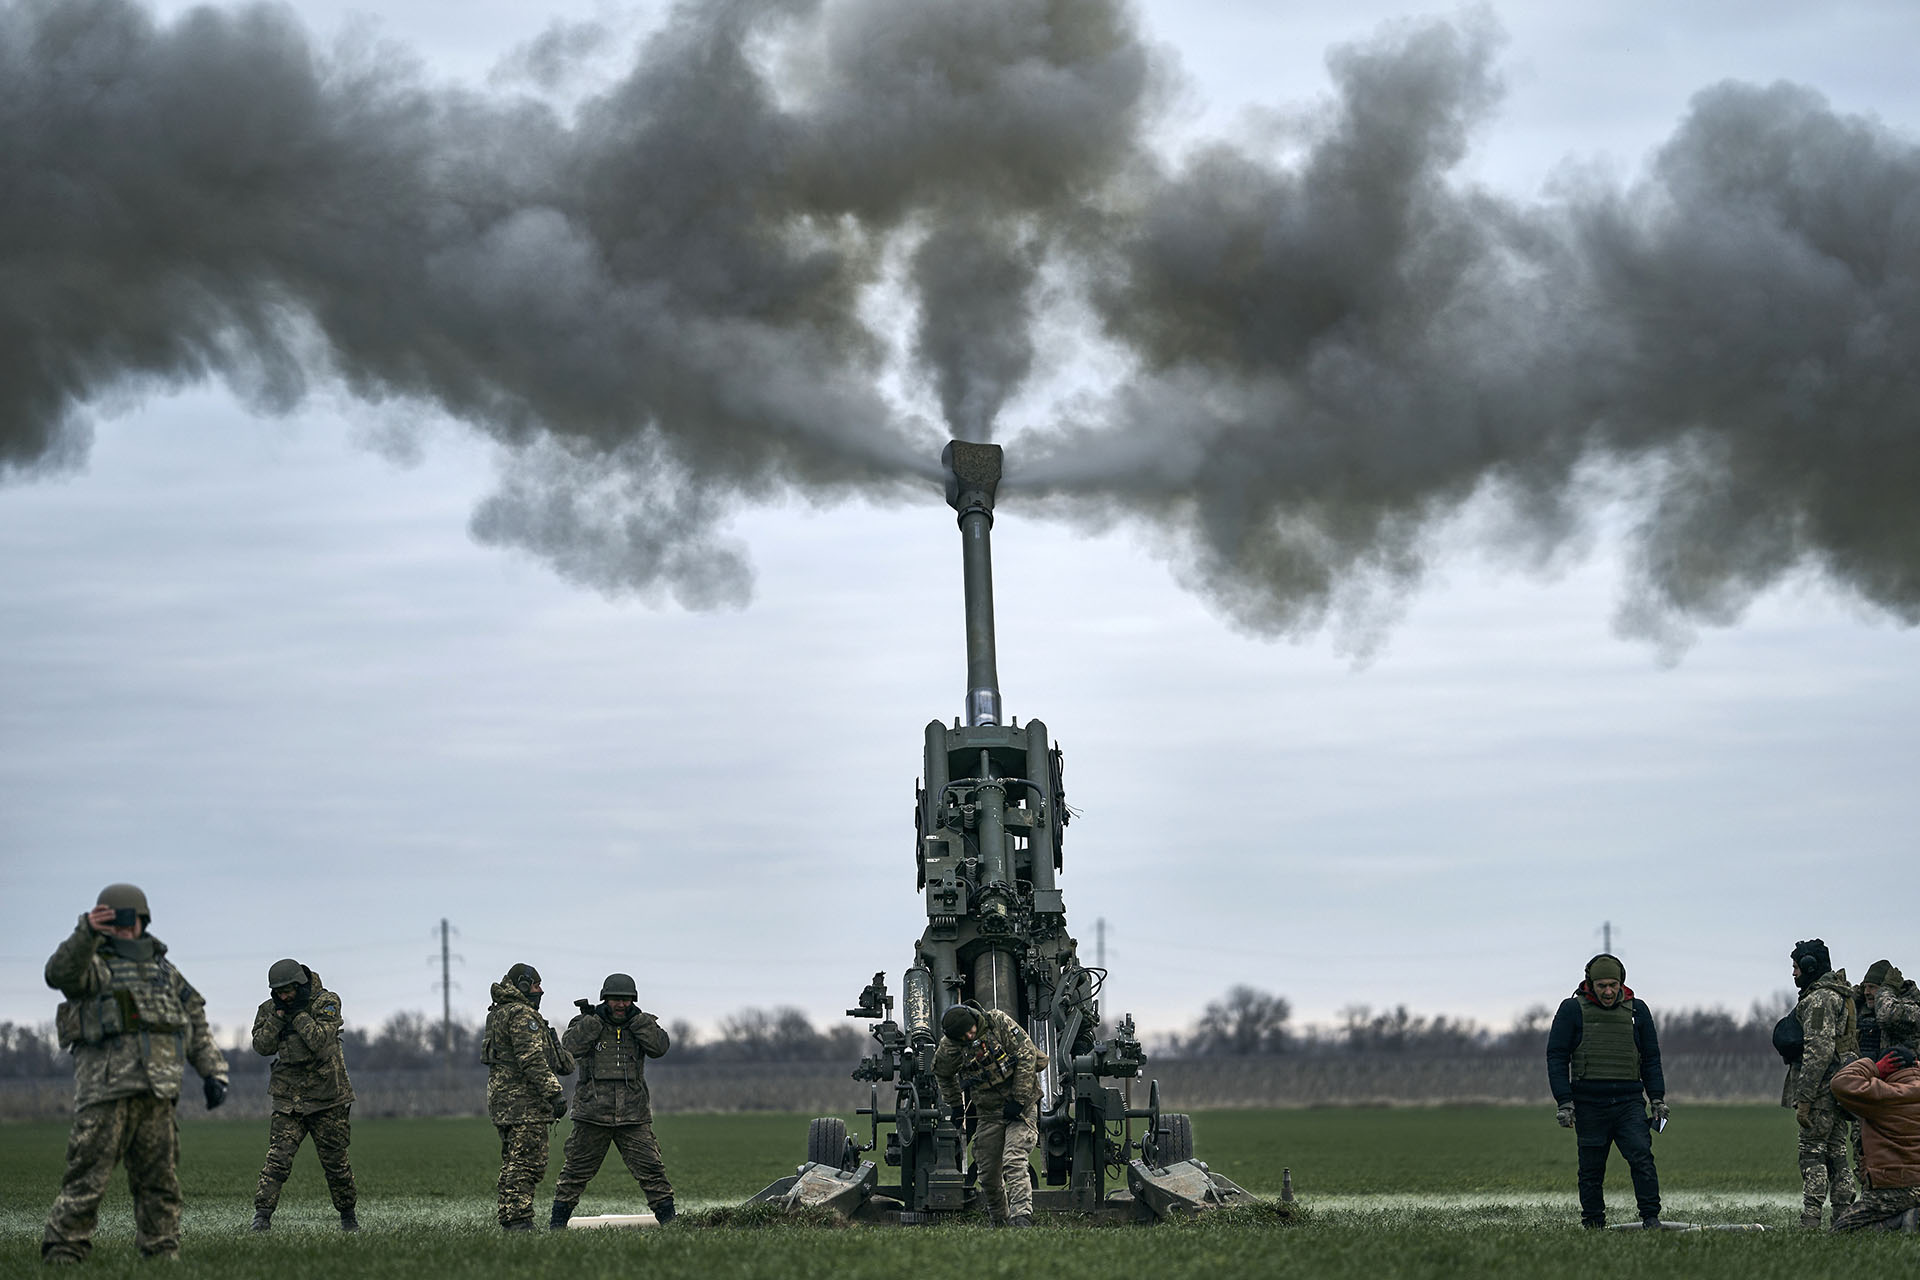 Ukrainian soldiers fire at Russian positions from a US-supplied M777 howitzer in the Kherson region of Ukraine on January 9, 2023. (AP Photo/Libkos)